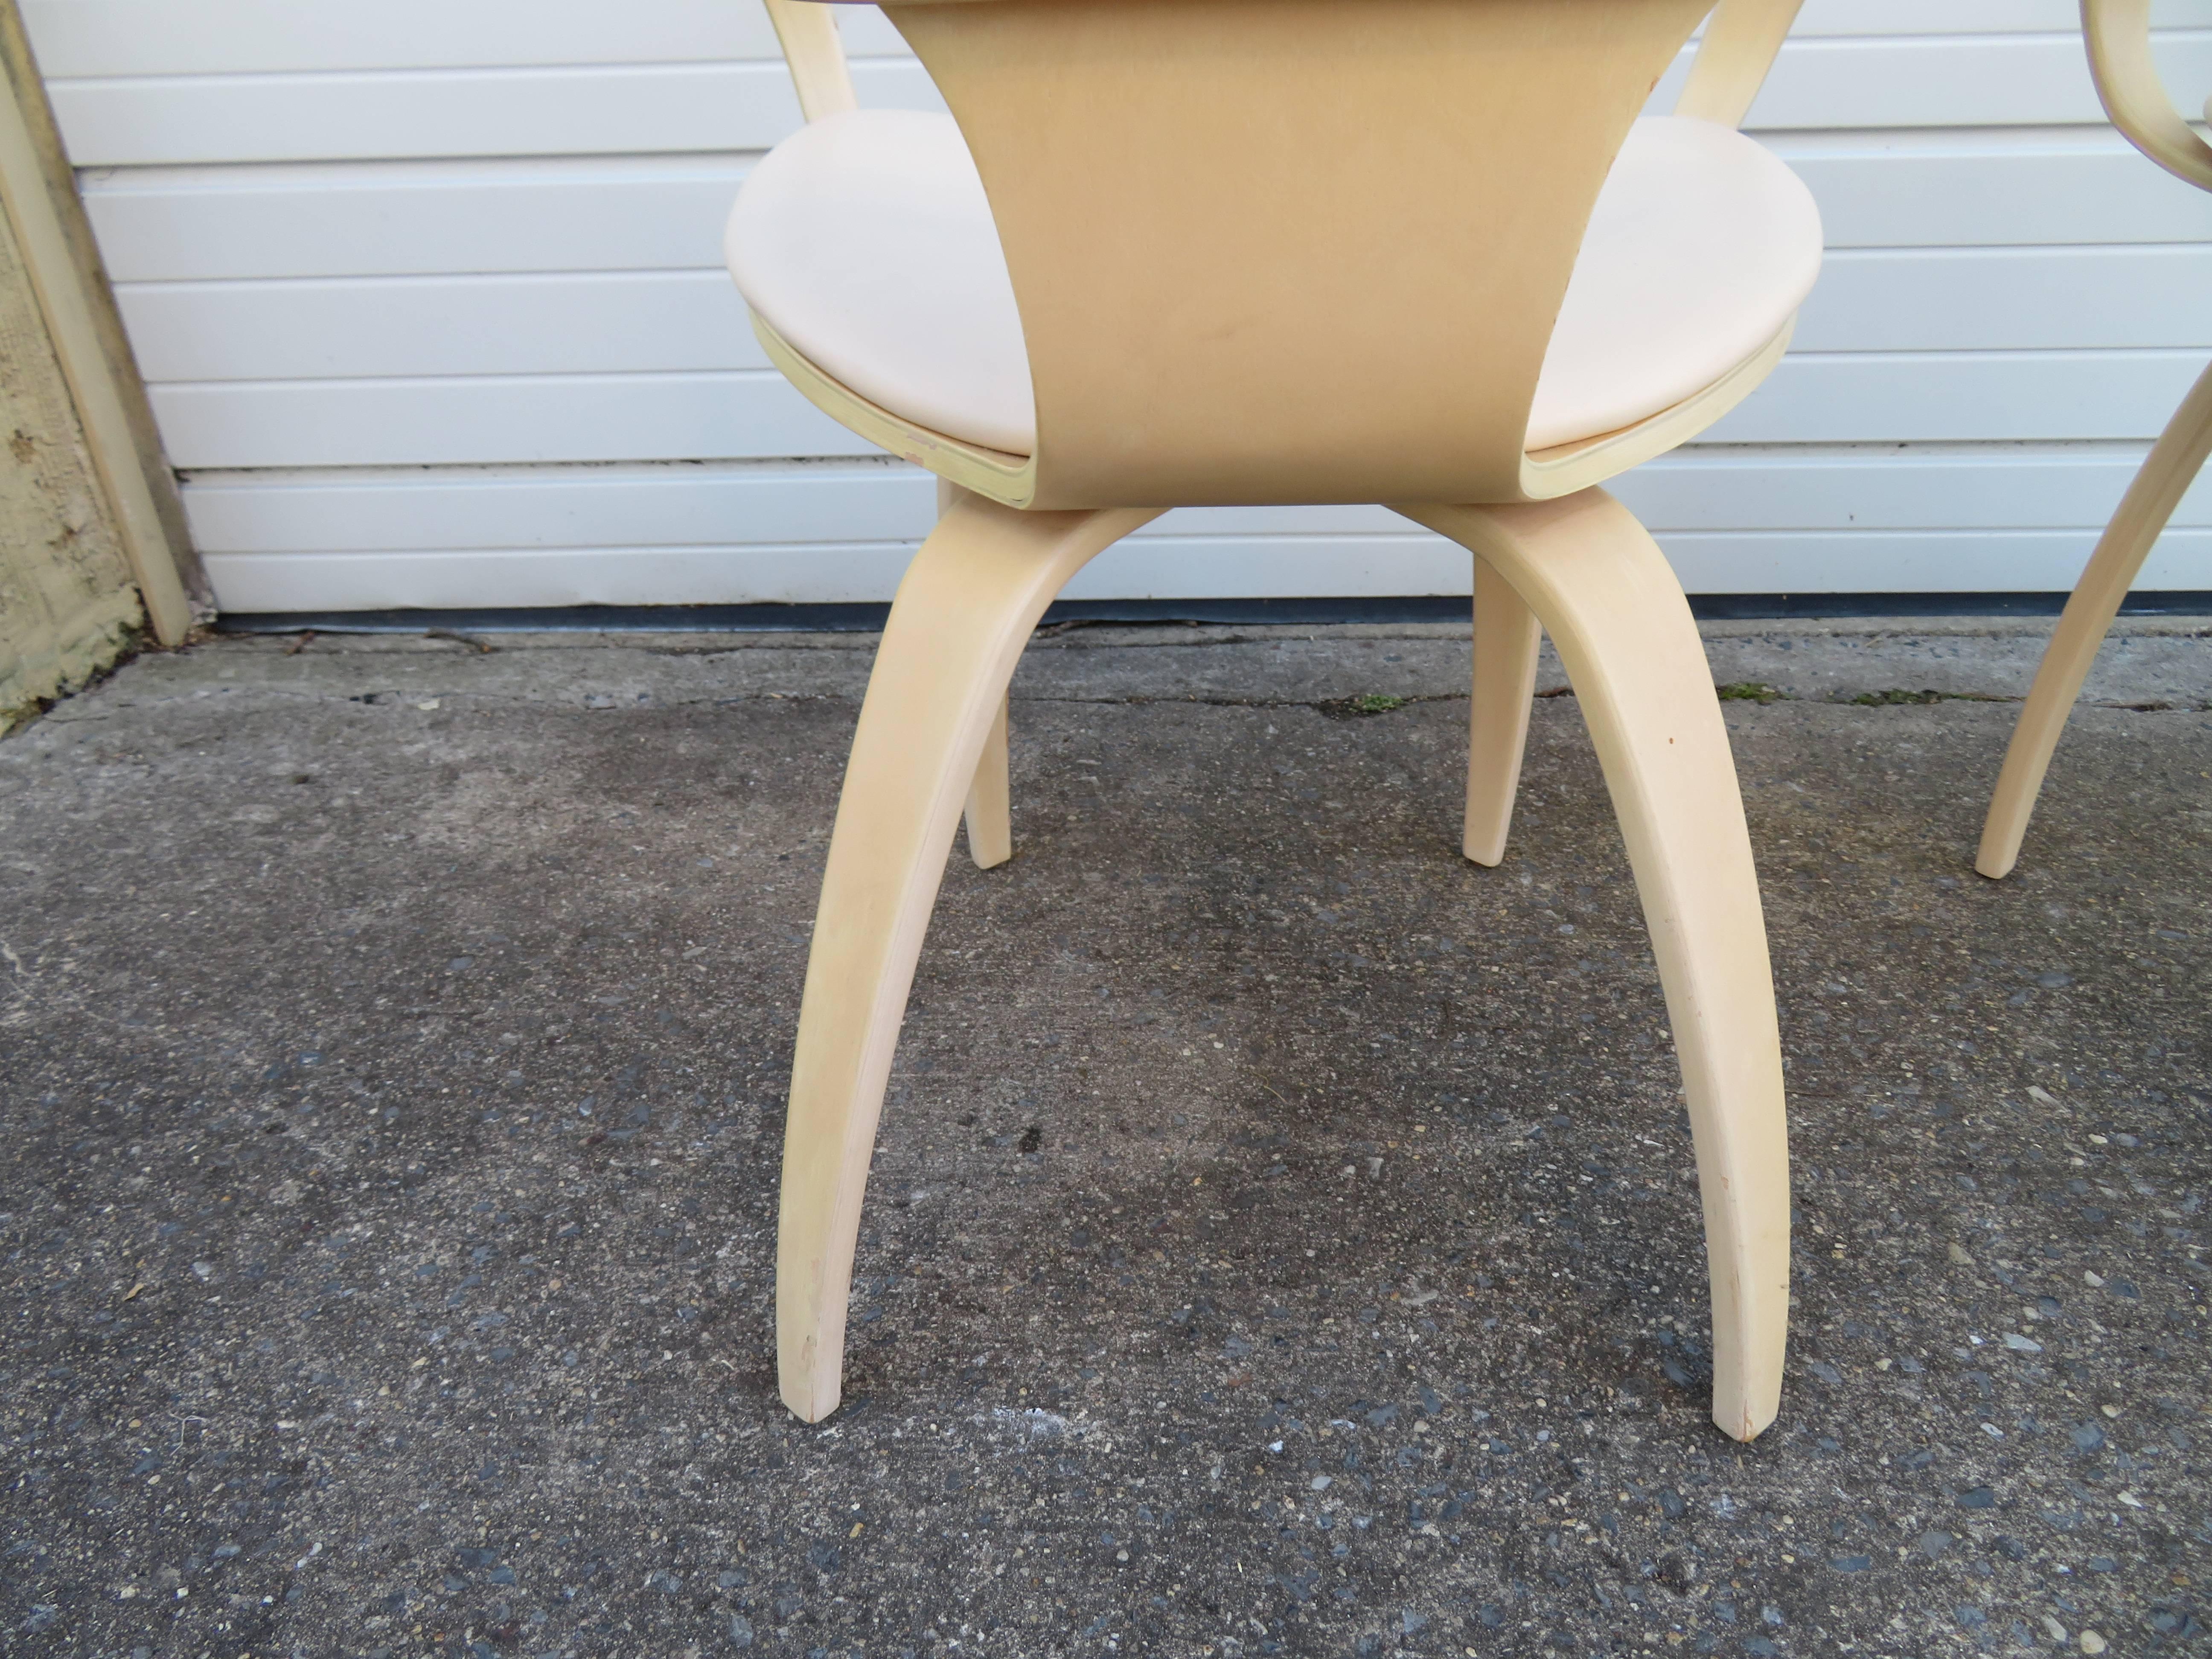 Late 20th Century Lovely Pair of Norman Cherner Plycraft Pretzel Chairs, Mid-Century Modern